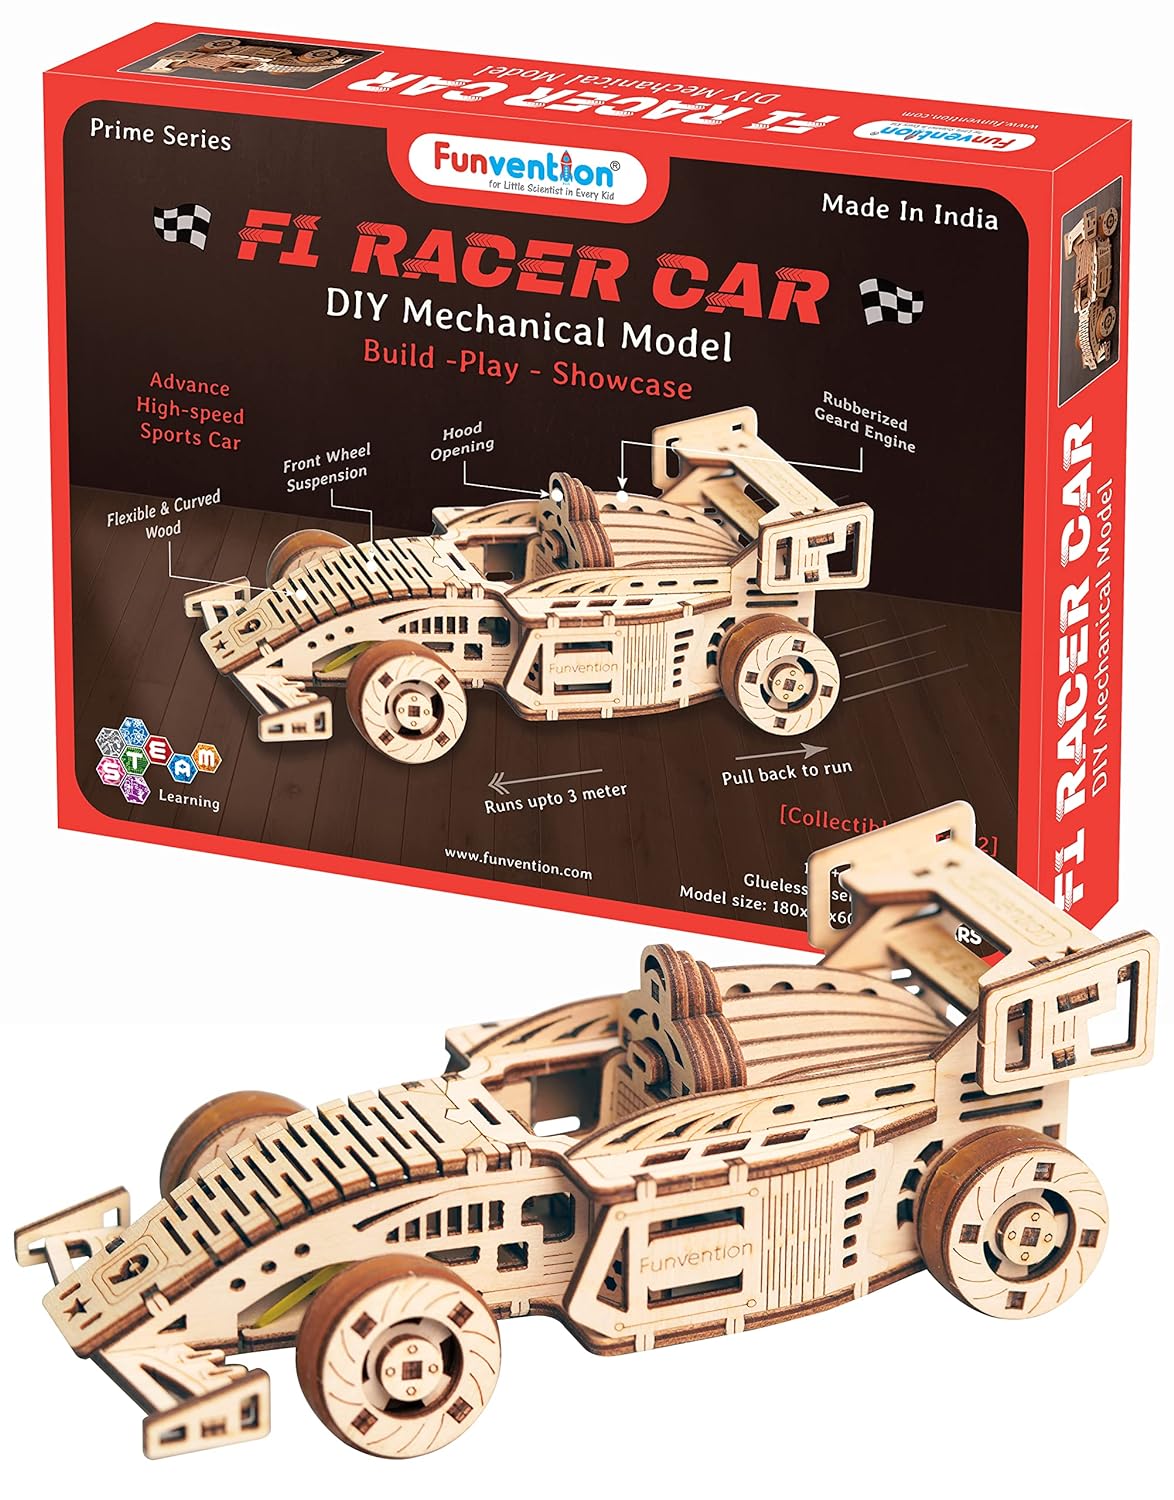 Funvention- for Little Scientist in Every Kid FUNVENTION F1 Racer Car - DIY Functional Mechanical Model 3D Puzzle STEM Lerning Kit Collectible Cars Building Kit with Working Wheels & Shocks Pack of 1